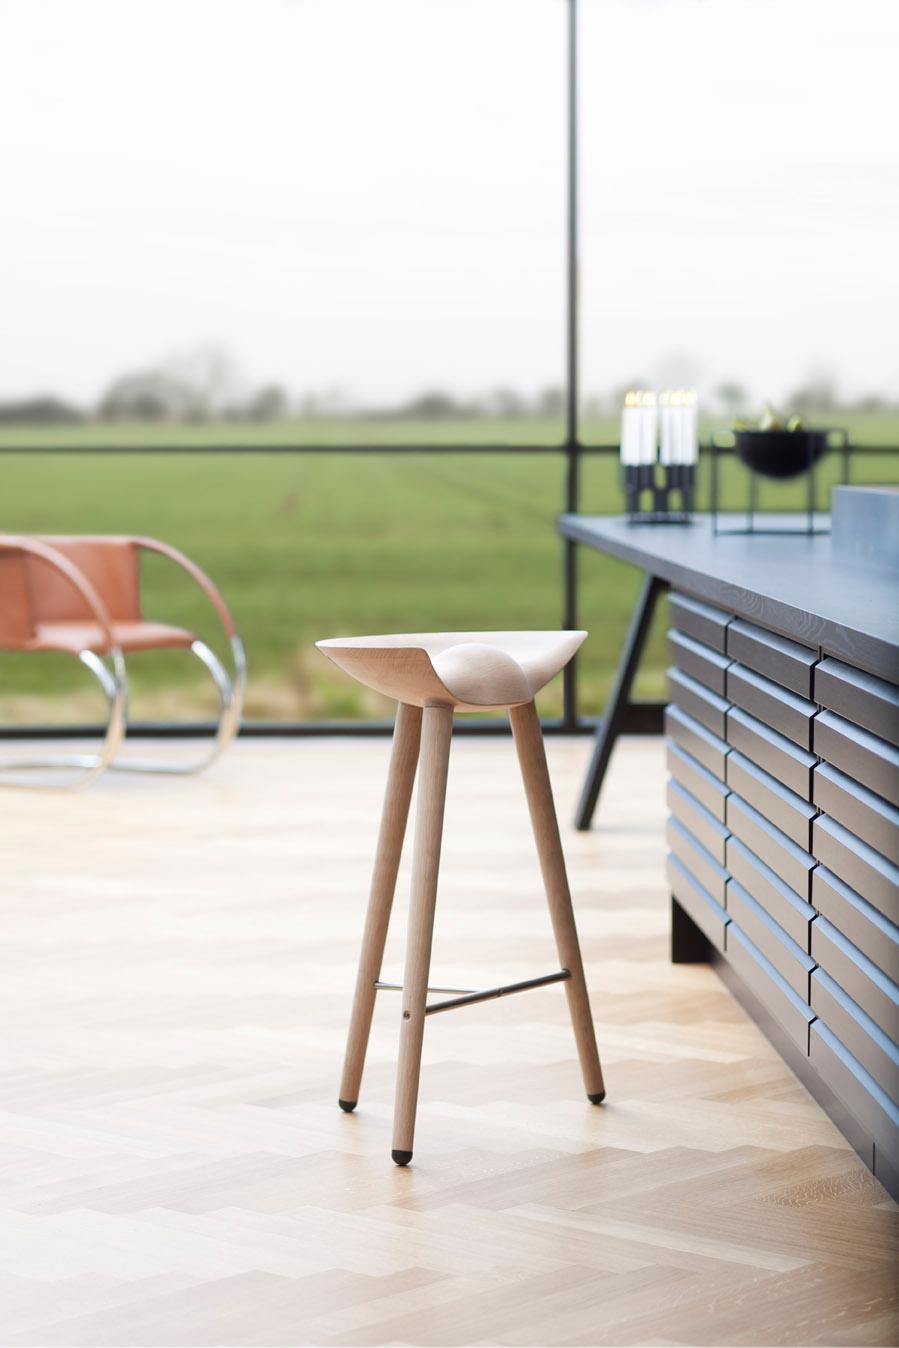 Brown oak and stainless steel counter stool by Lassen
Dimensions: H 69 x W 36 x L 55.5 cm
Materials: Oak, Stainless Steel

In 1942 Mogens Lassen designed the Stool ML42 as a piece for a furniture exhibition held at the Danish Museum of